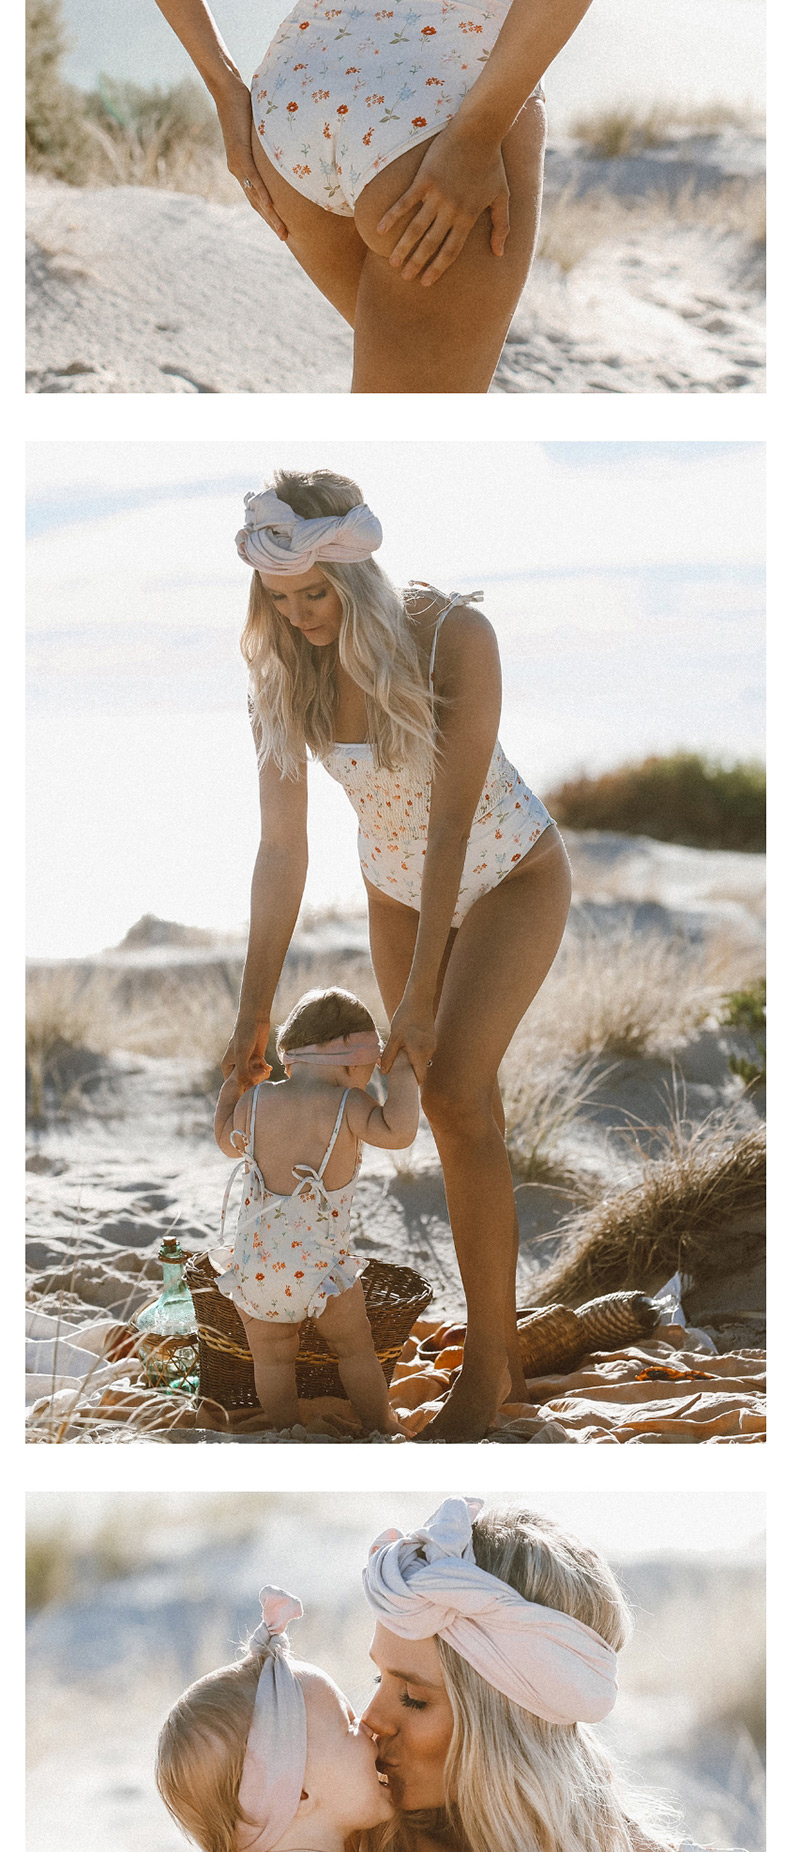 Fashion White Wrinkle-laying Process Bandage Lace One-piece Swimsuit,One Pieces